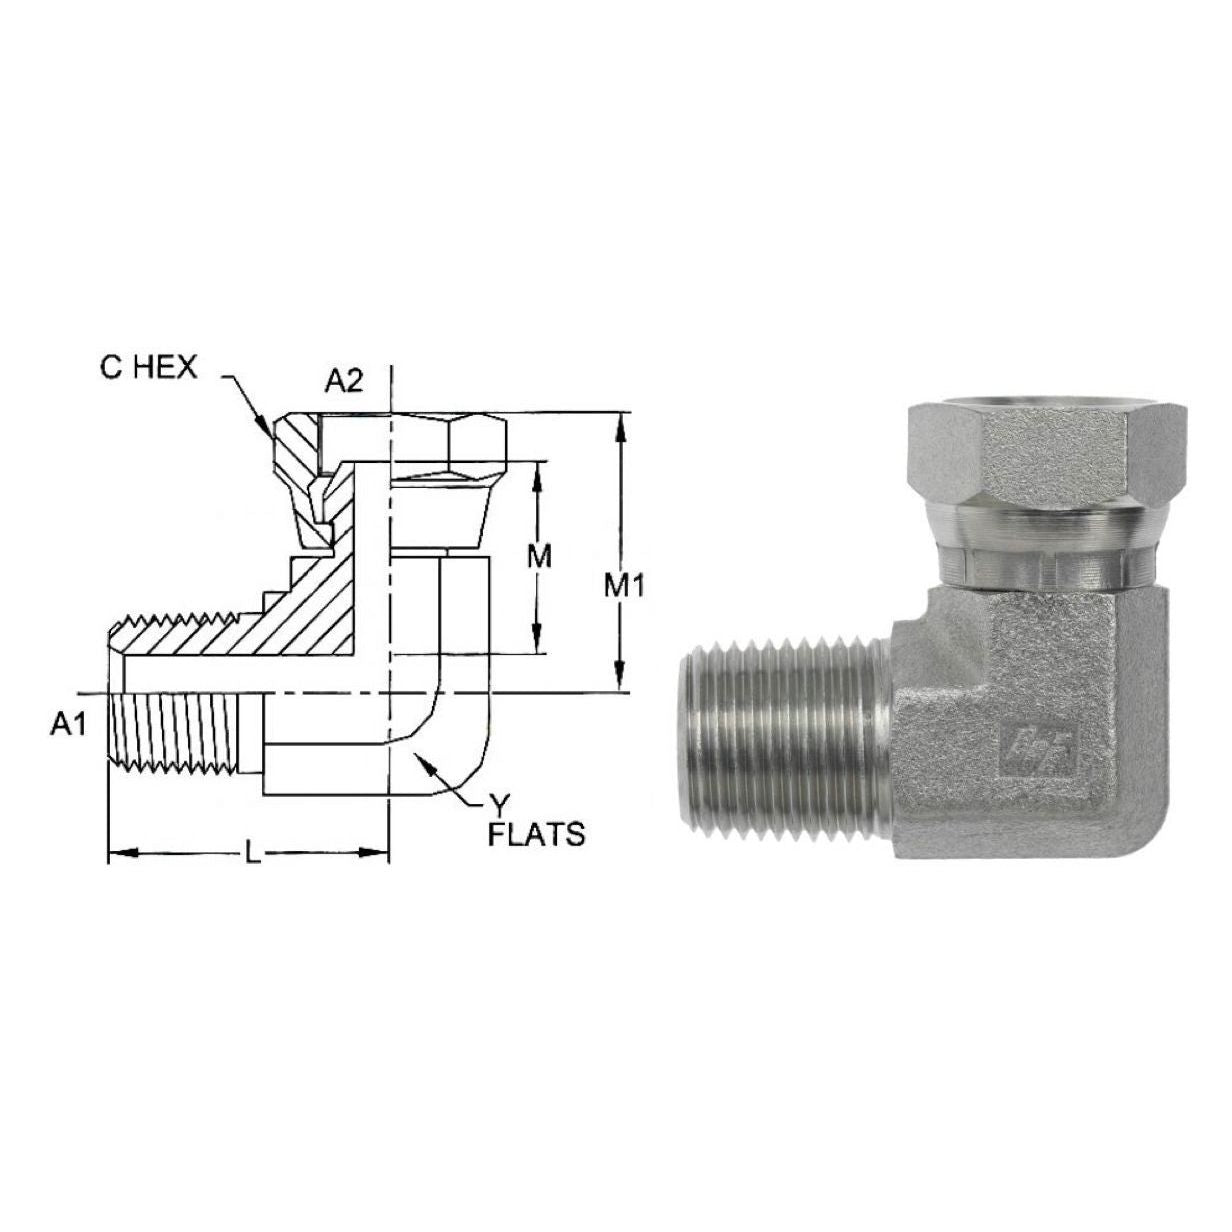 1501-06-04-SS : OneHydraulics 90-Degree Elbow, 0.375 (3/8) Male NPT x 0.25 (1/4) Female NPT Swivel, Stainless Steel, 6000psi